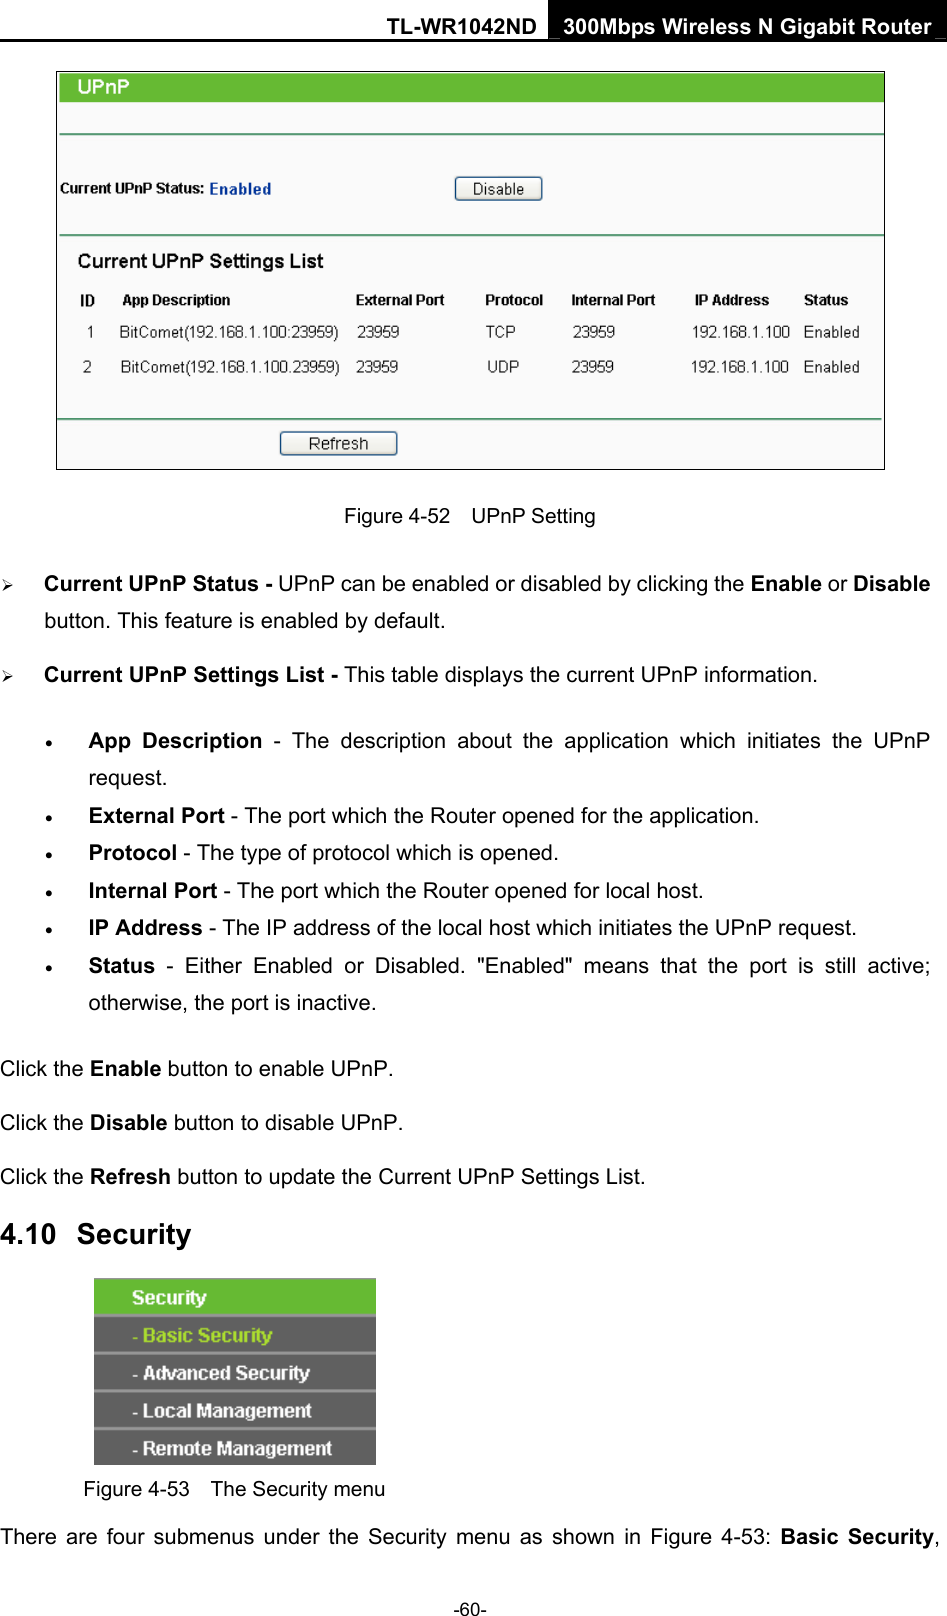 TL-WR1042ND 300Mbps Wireless N Gigabit Router -60-  Figure 4-52  UPnP Setting ¾ Current UPnP Status - UPnP can be enabled or disabled by clicking the Enable or Disable button. This feature is enabled by default. ¾ Current UPnP Settings List - This table displays the current UPnP information. • App Description - The description about the application which initiates the UPnP request.  • External Port - The port which the Router opened for the application.   • Protocol - The type of protocol which is opened.   • Internal Port - The port which the Router opened for local host.   • IP Address - The IP address of the local host which initiates the UPnP request.   • Status - Either Enabled or Disabled. &quot;Enabled&quot; means that the port is still active; otherwise, the port is inactive.   Click the Enable button to enable UPnP. Click the Disable button to disable UPnP. Click the Refresh button to update the Current UPnP Settings List. 4.10  Security  Figure 4-53    The Security menu There are four submenus under the Security menu as shown in Figure 4-53: Basic Security, 